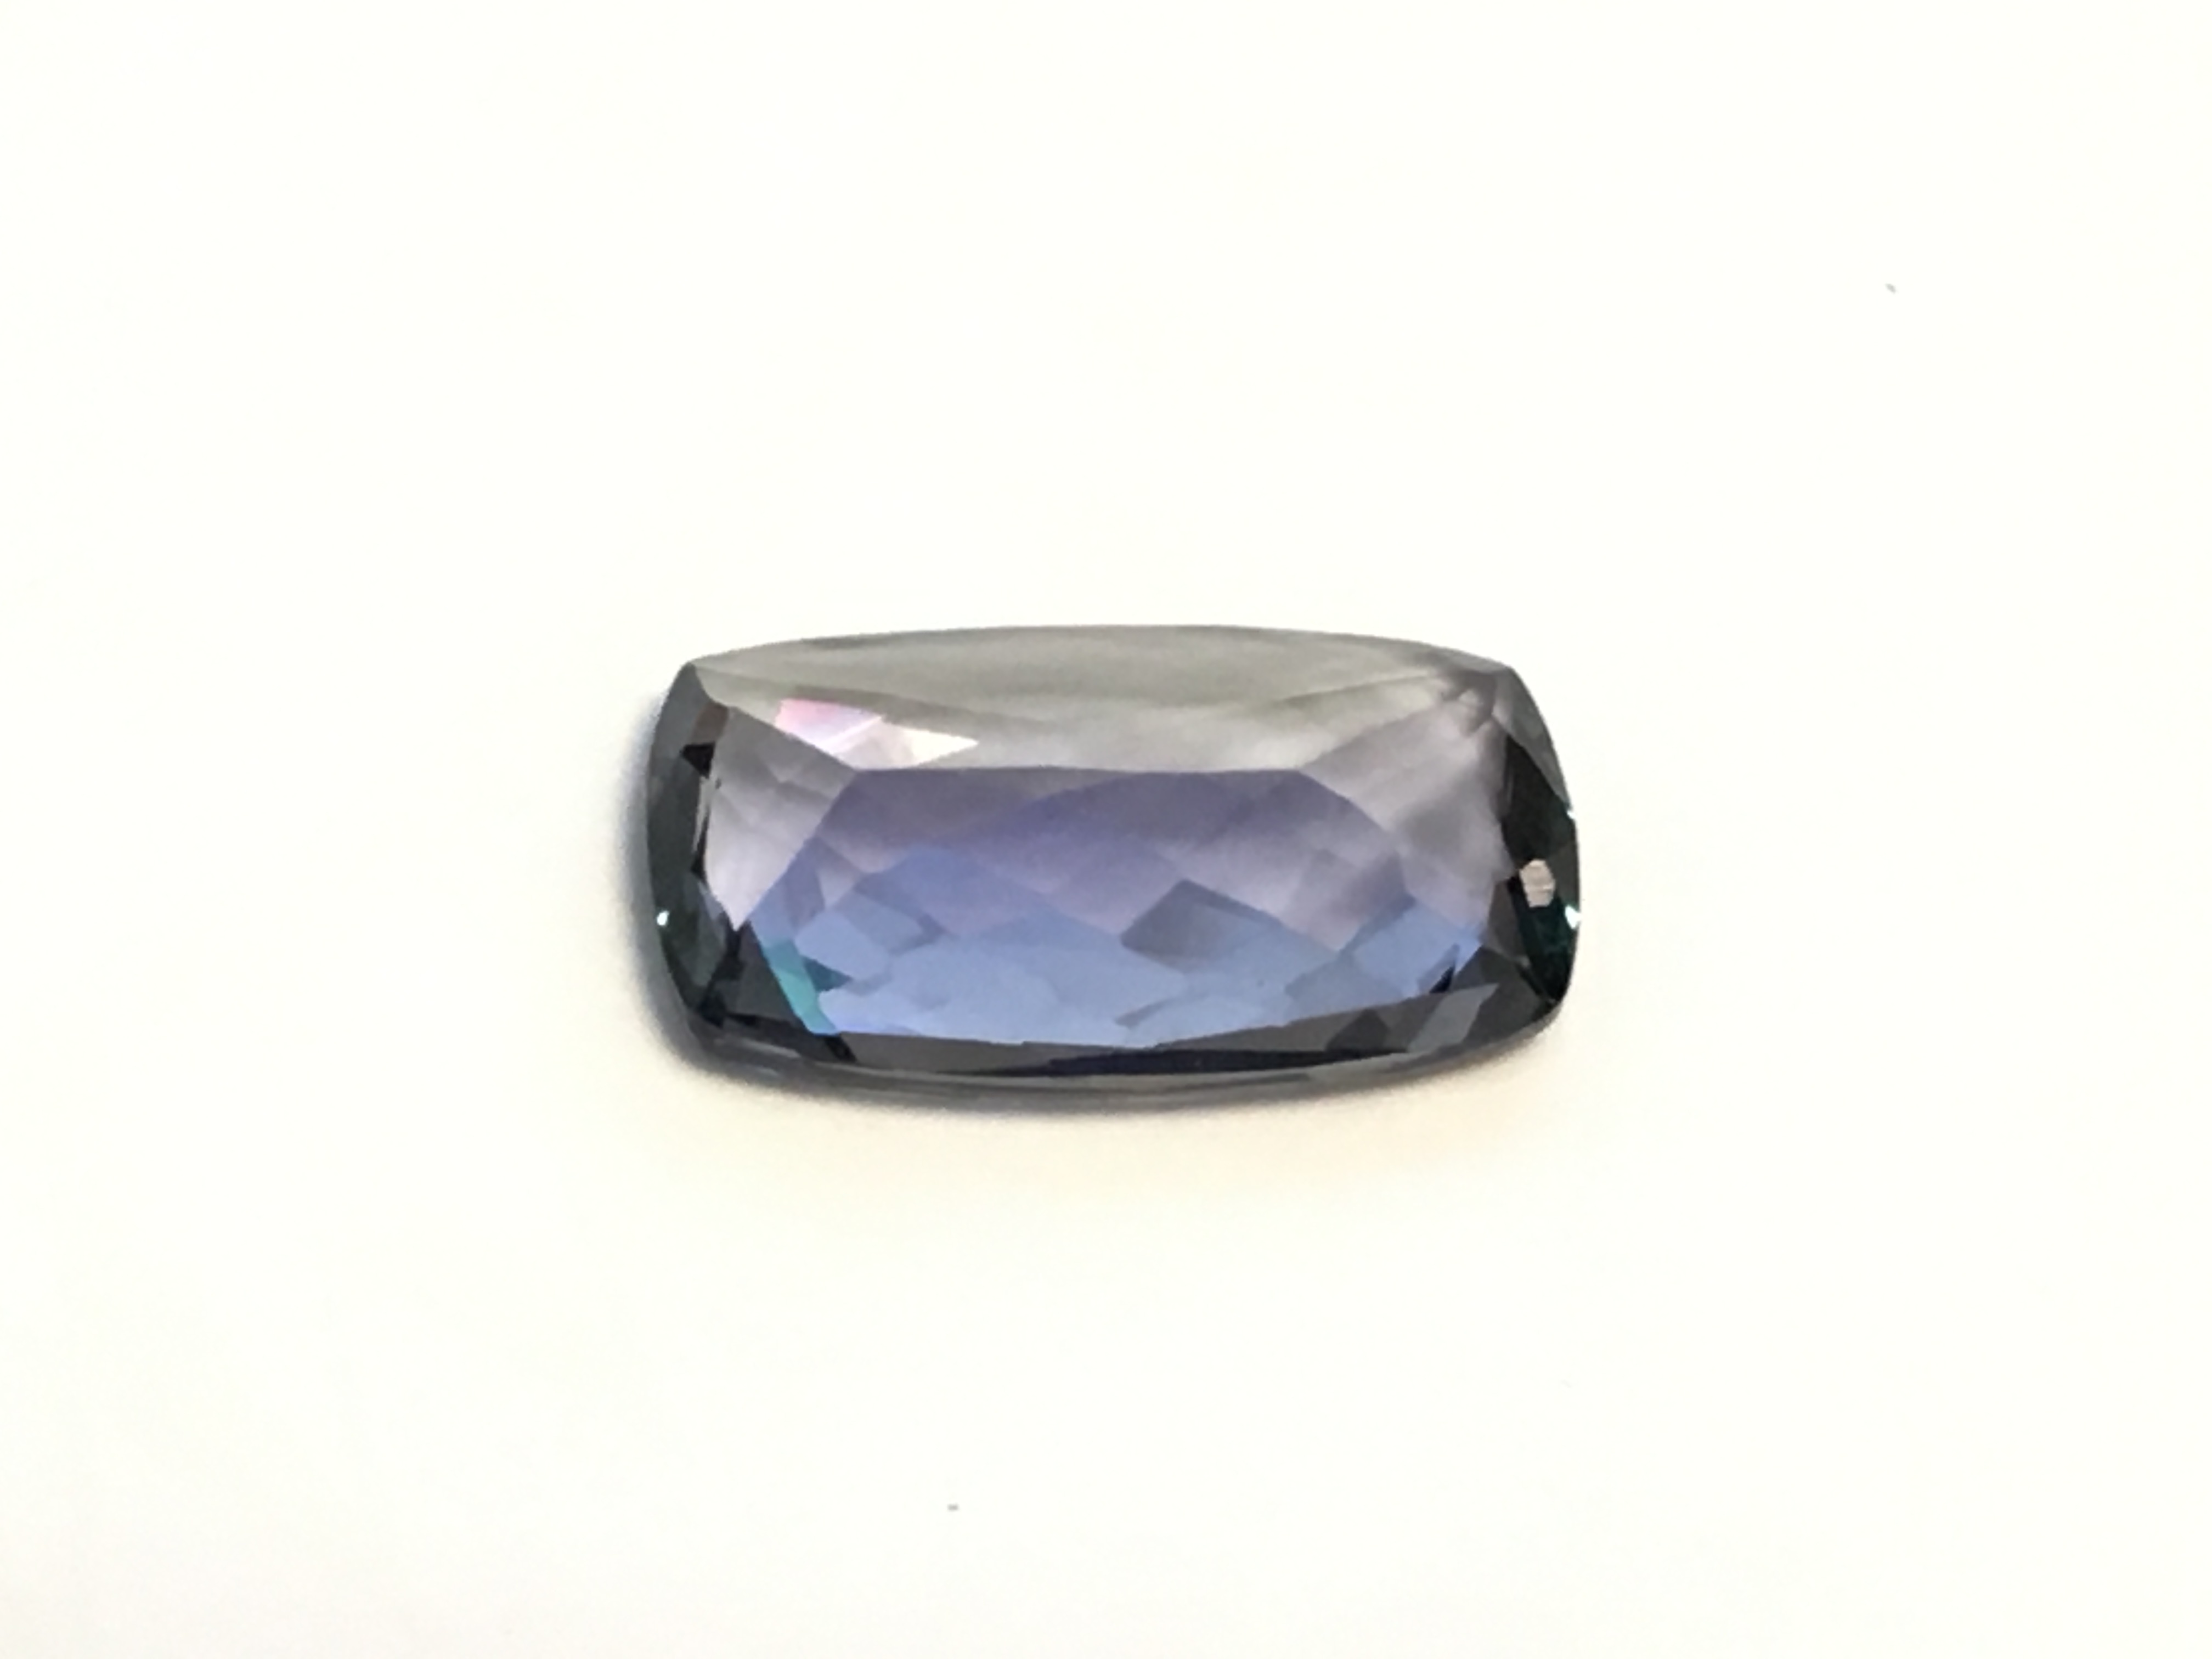 7.43ct Natural Tanzanite with GIA Certificate - Image 2 of 4